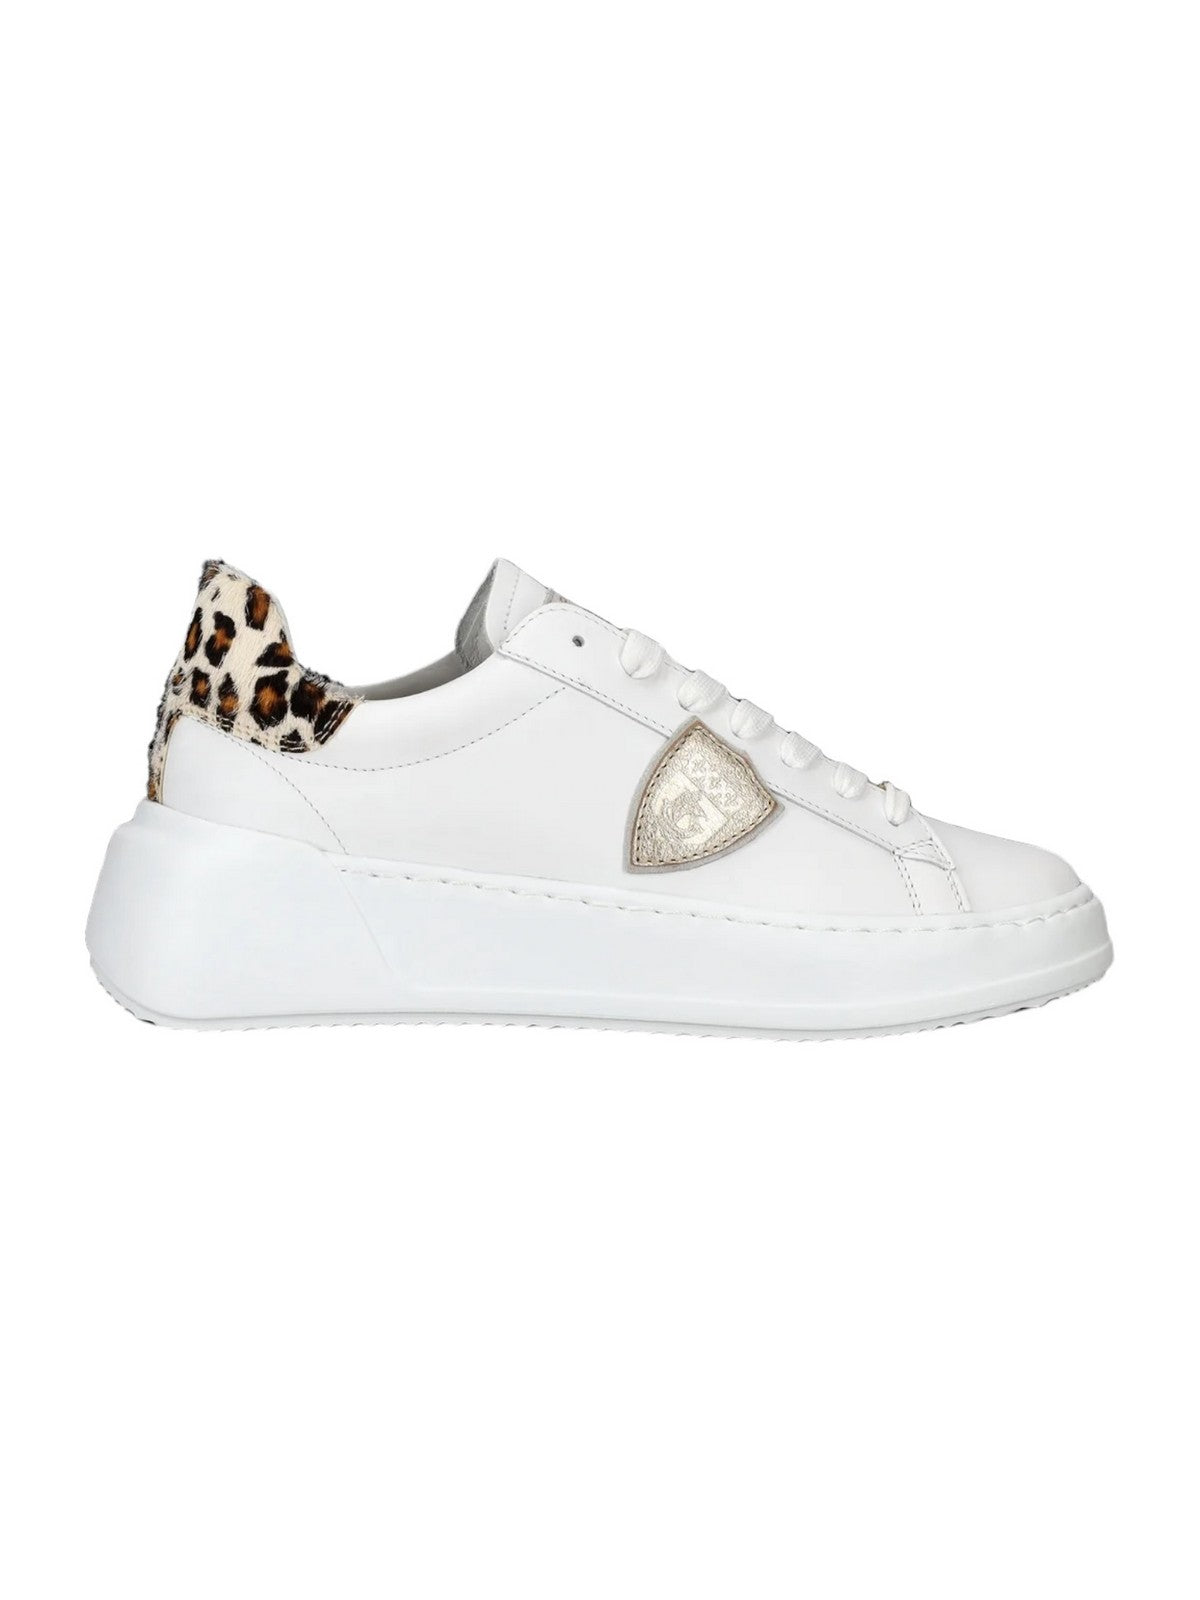 PHILIPPE MODEL Sneaker Donna Tres temple low woman BJLD VA01 Bianco